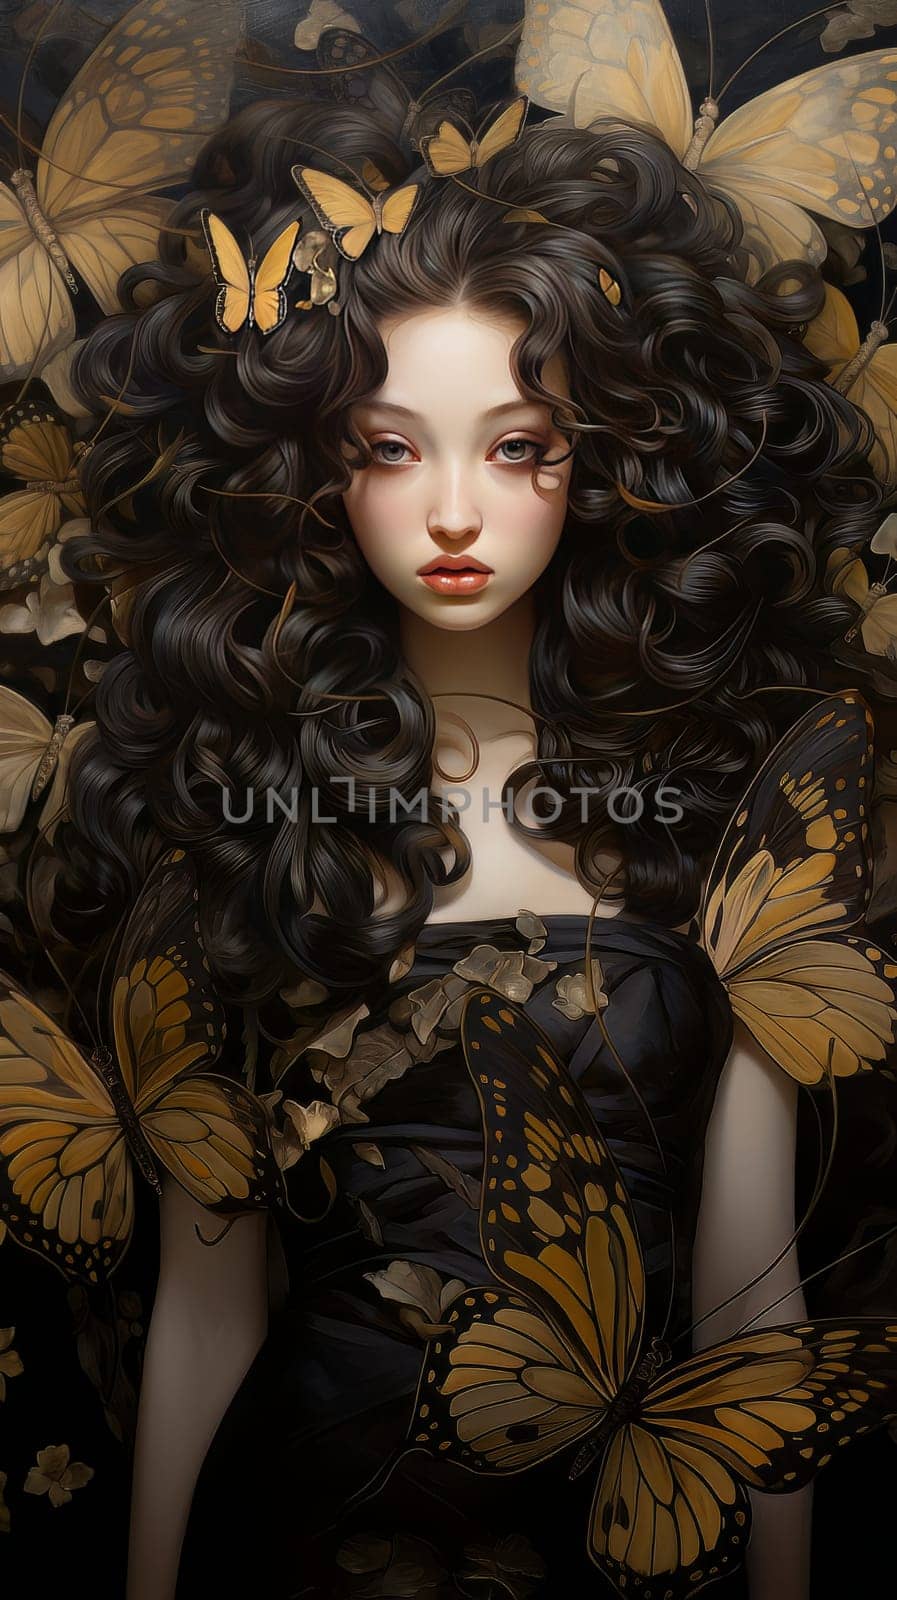 Surreal fairy tale character portrait of cartoon princess with luxurious curls and yellow butterflies AI